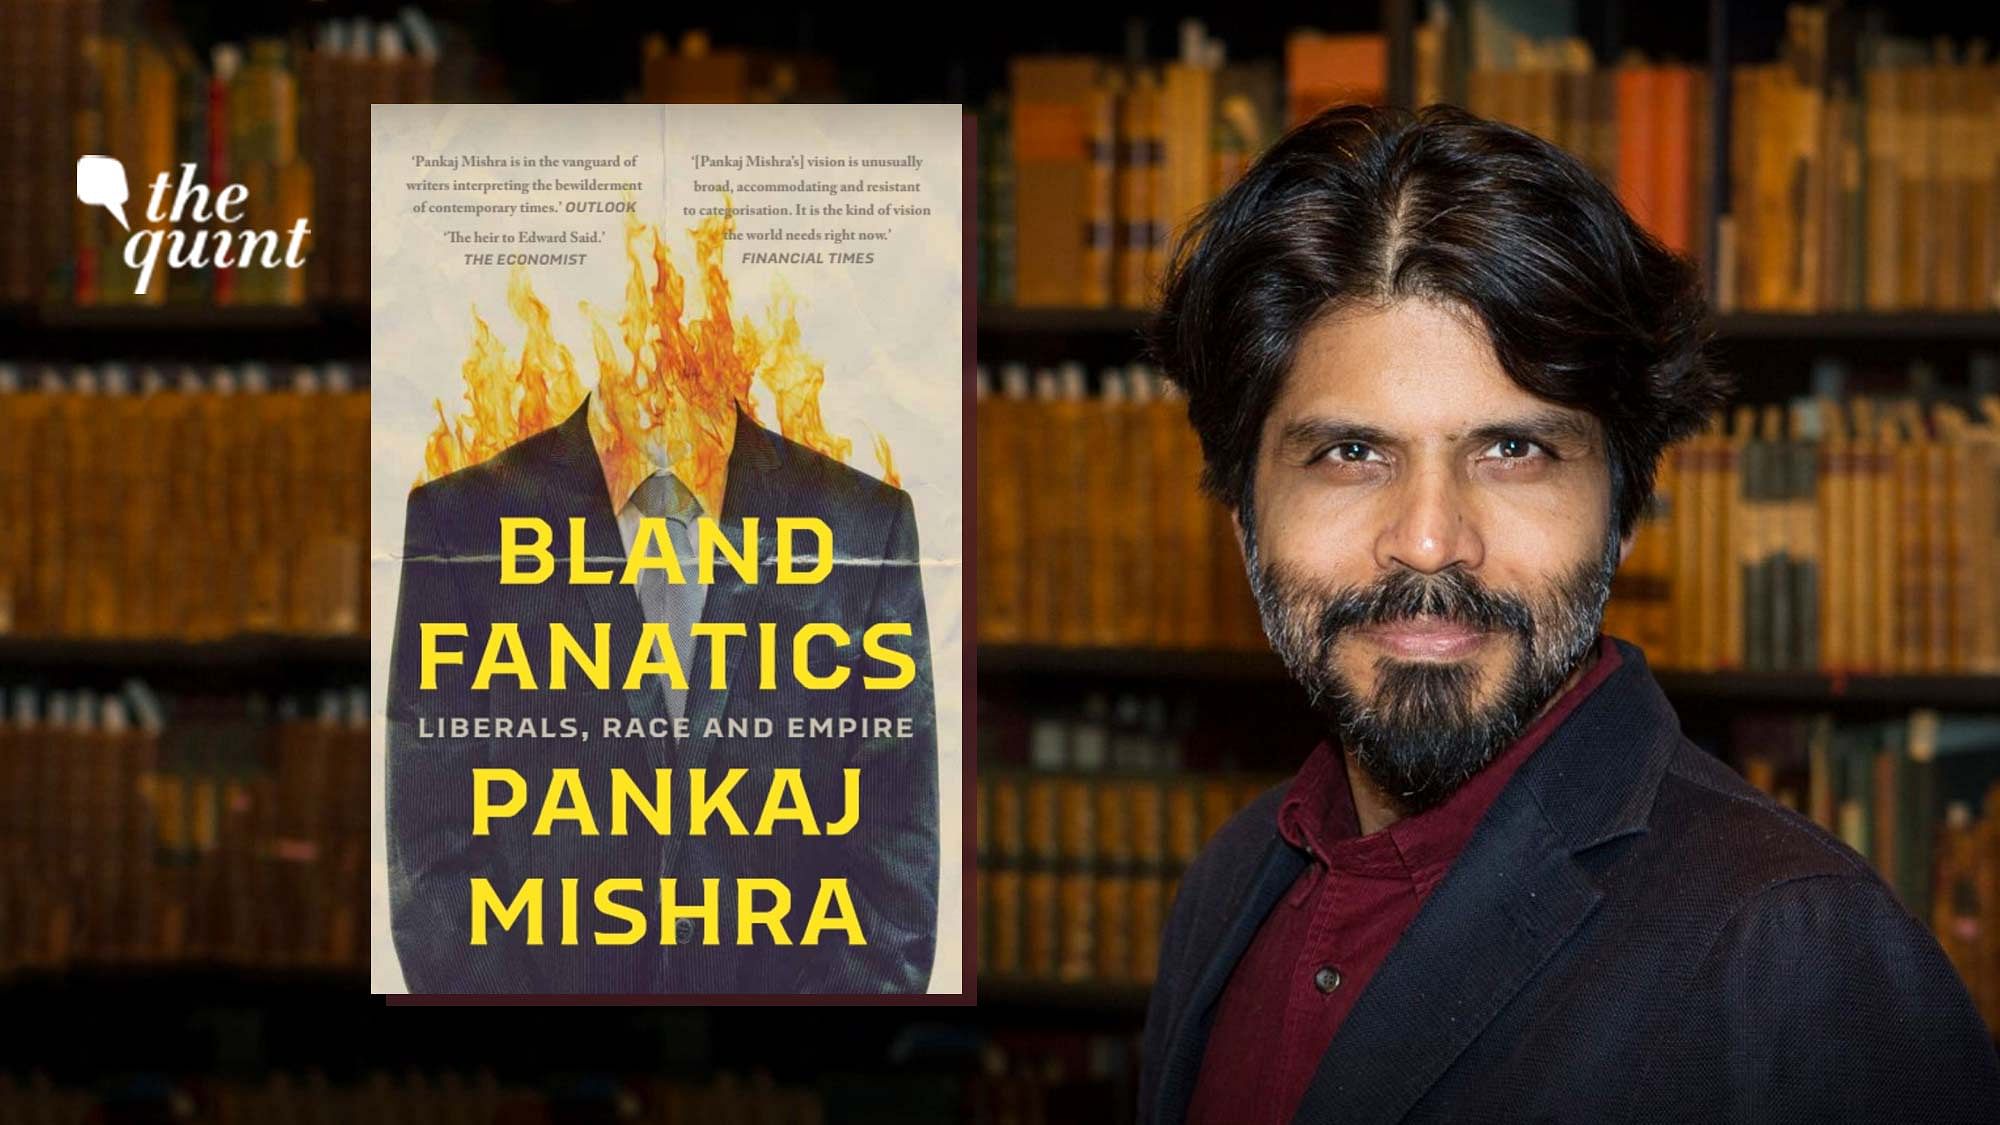 An exclusive excerpt from Pankaj Mishra’s new book.